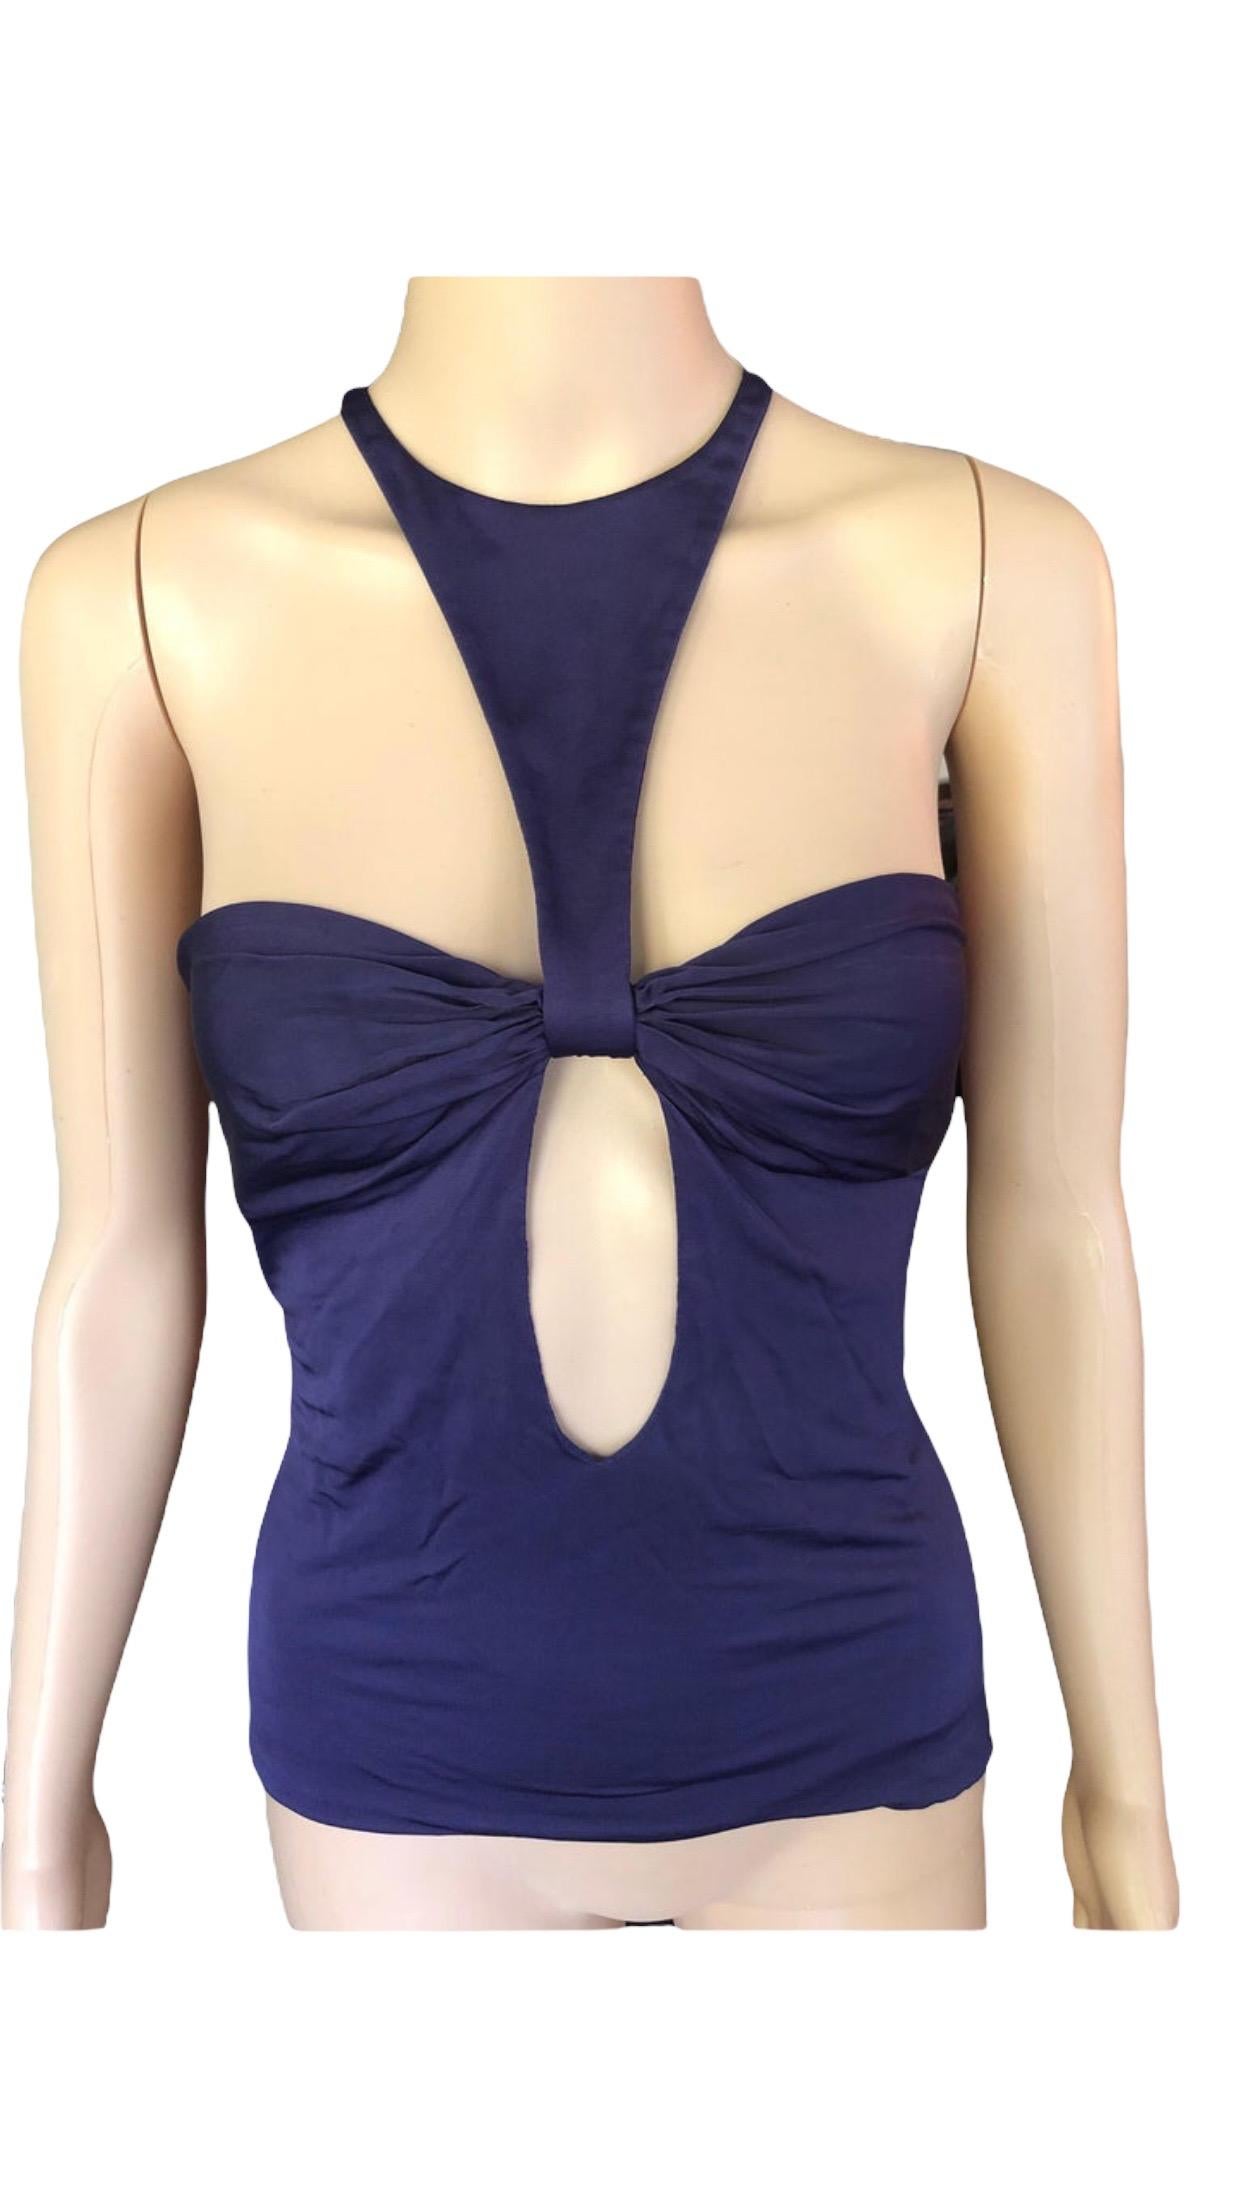 Tom Ford for Gucci F/W 2004 Plunging Cut-Out Top In Good Condition For Sale In Naples, FL